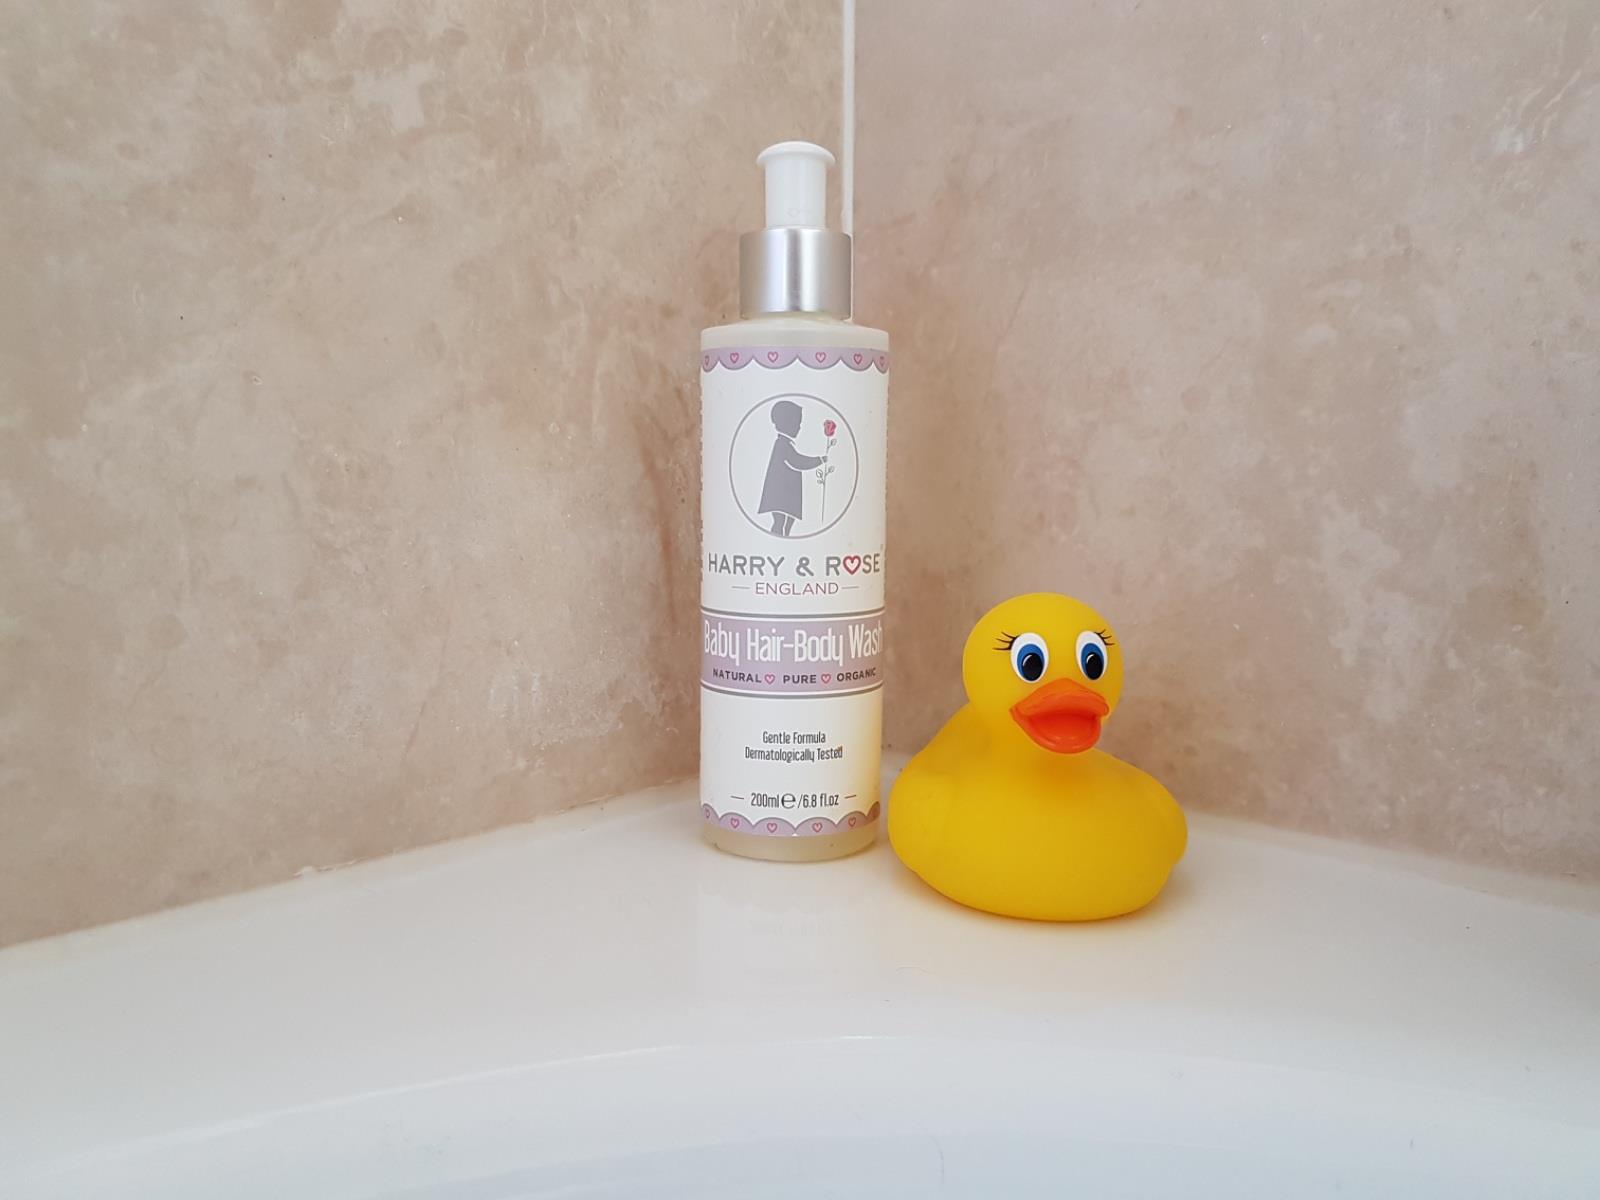 Harry and Rose gentle baby hair and body wash review